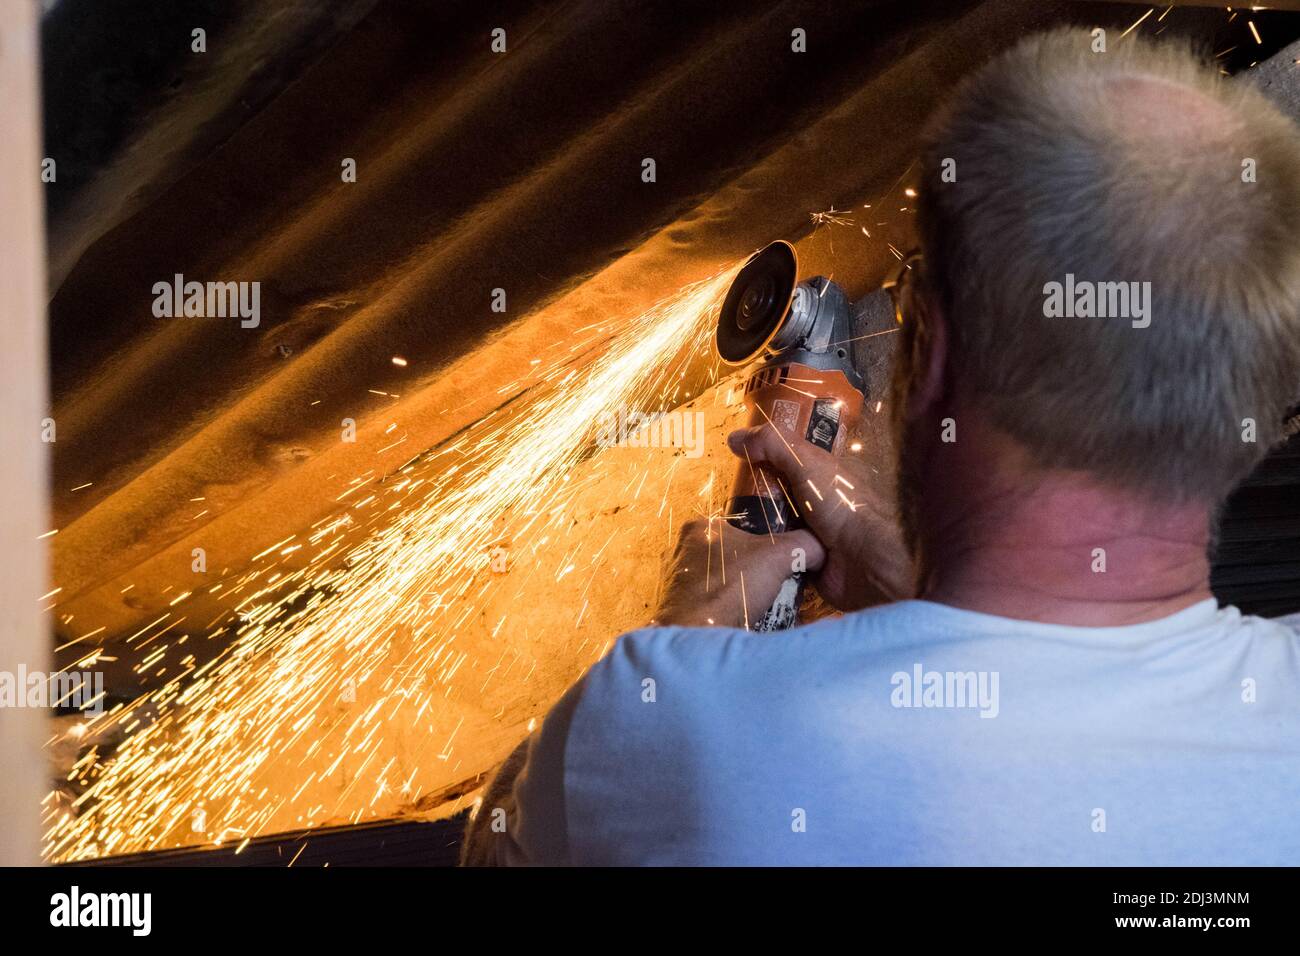 A man cutting metal roof with a flex radial saw with sparks flying Stock Photo